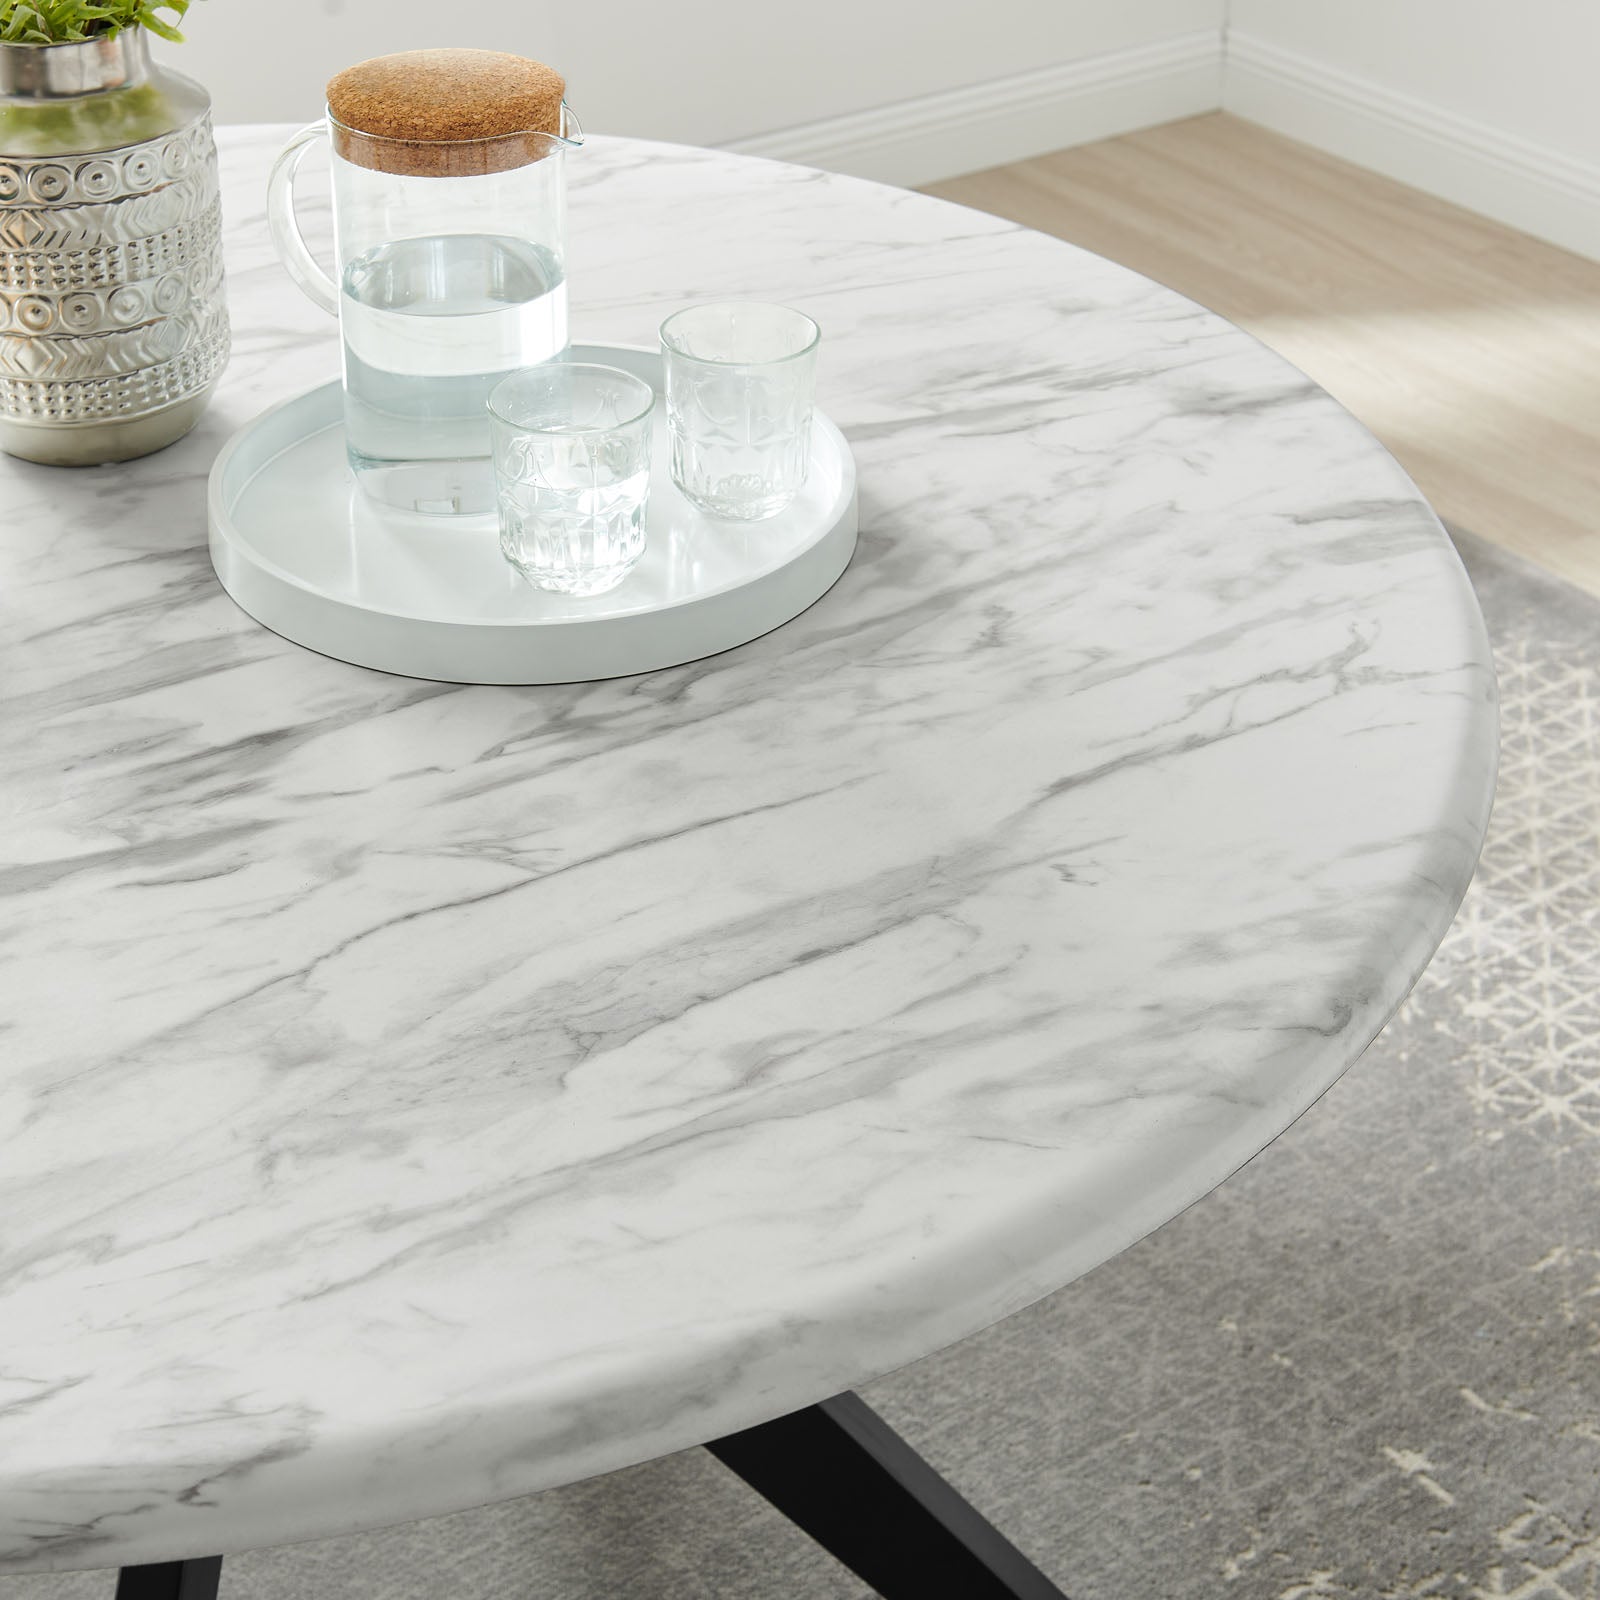 Traverse 50" Round Performance Artificial Marble Dining Table